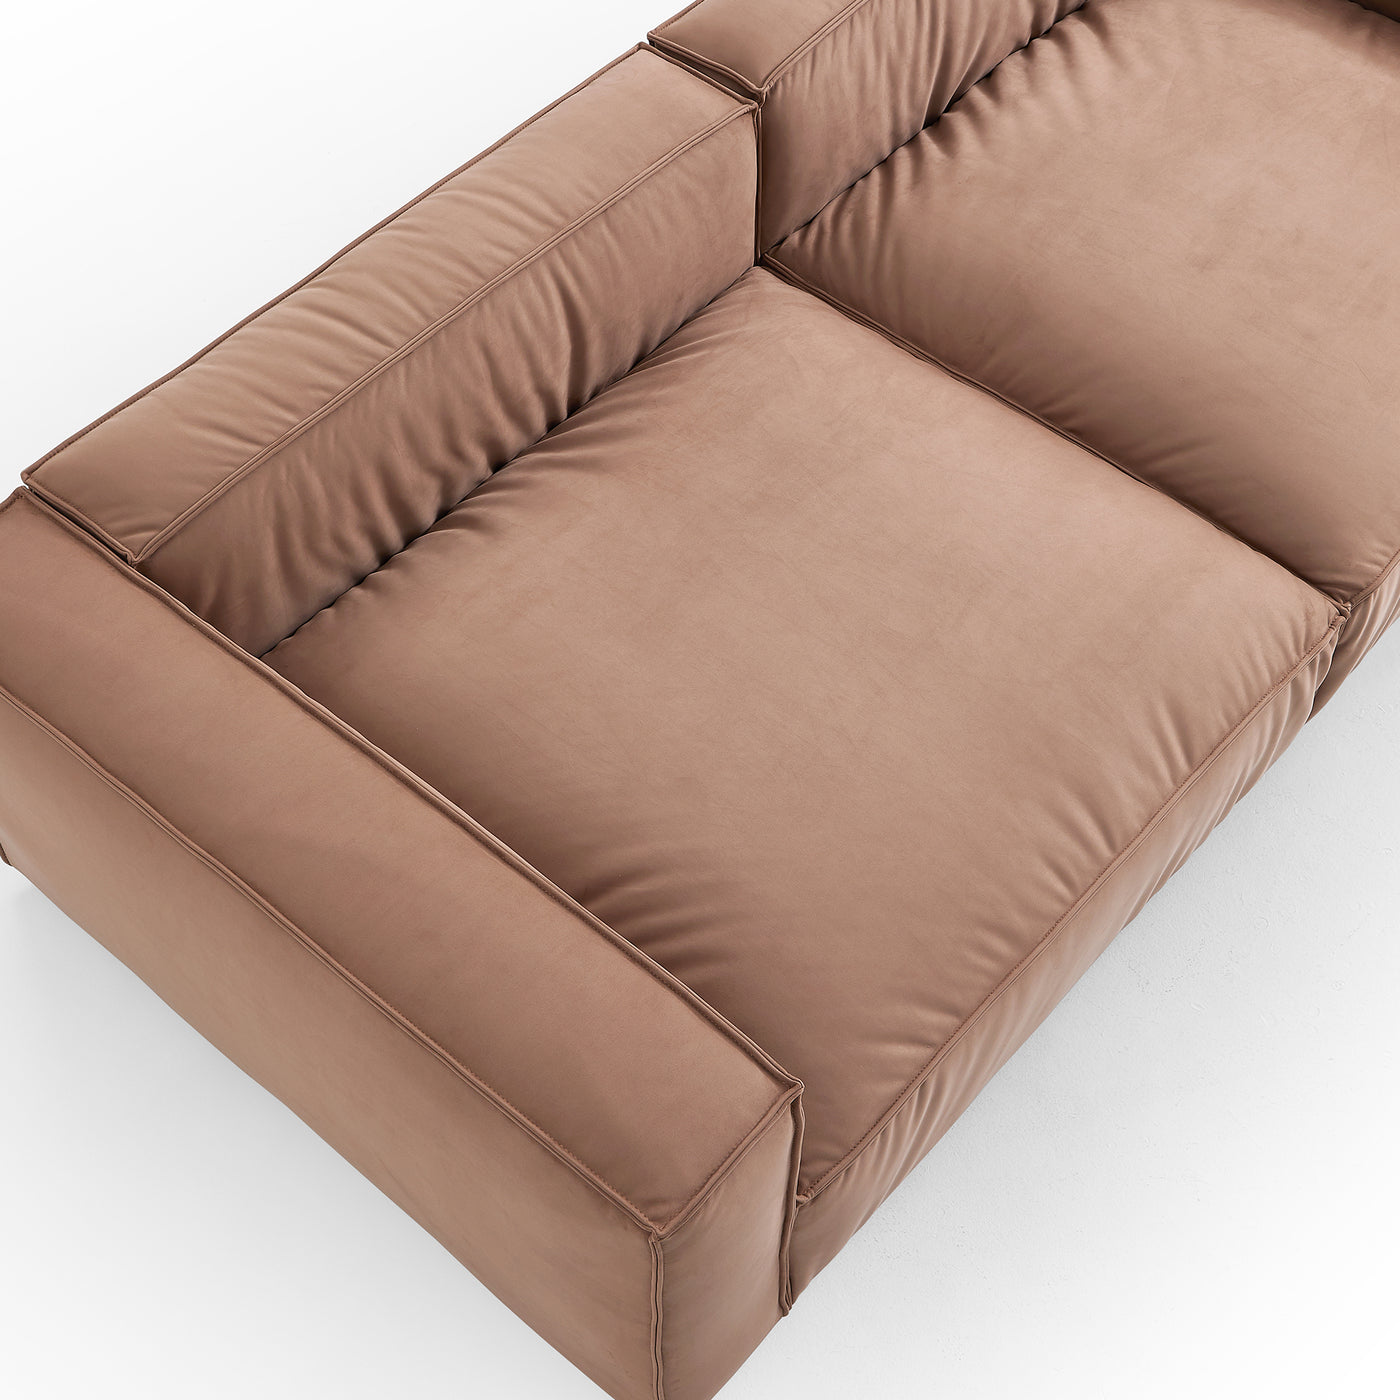 Luxury Minimalist Brown Fabric Daybed Sofa-Brown